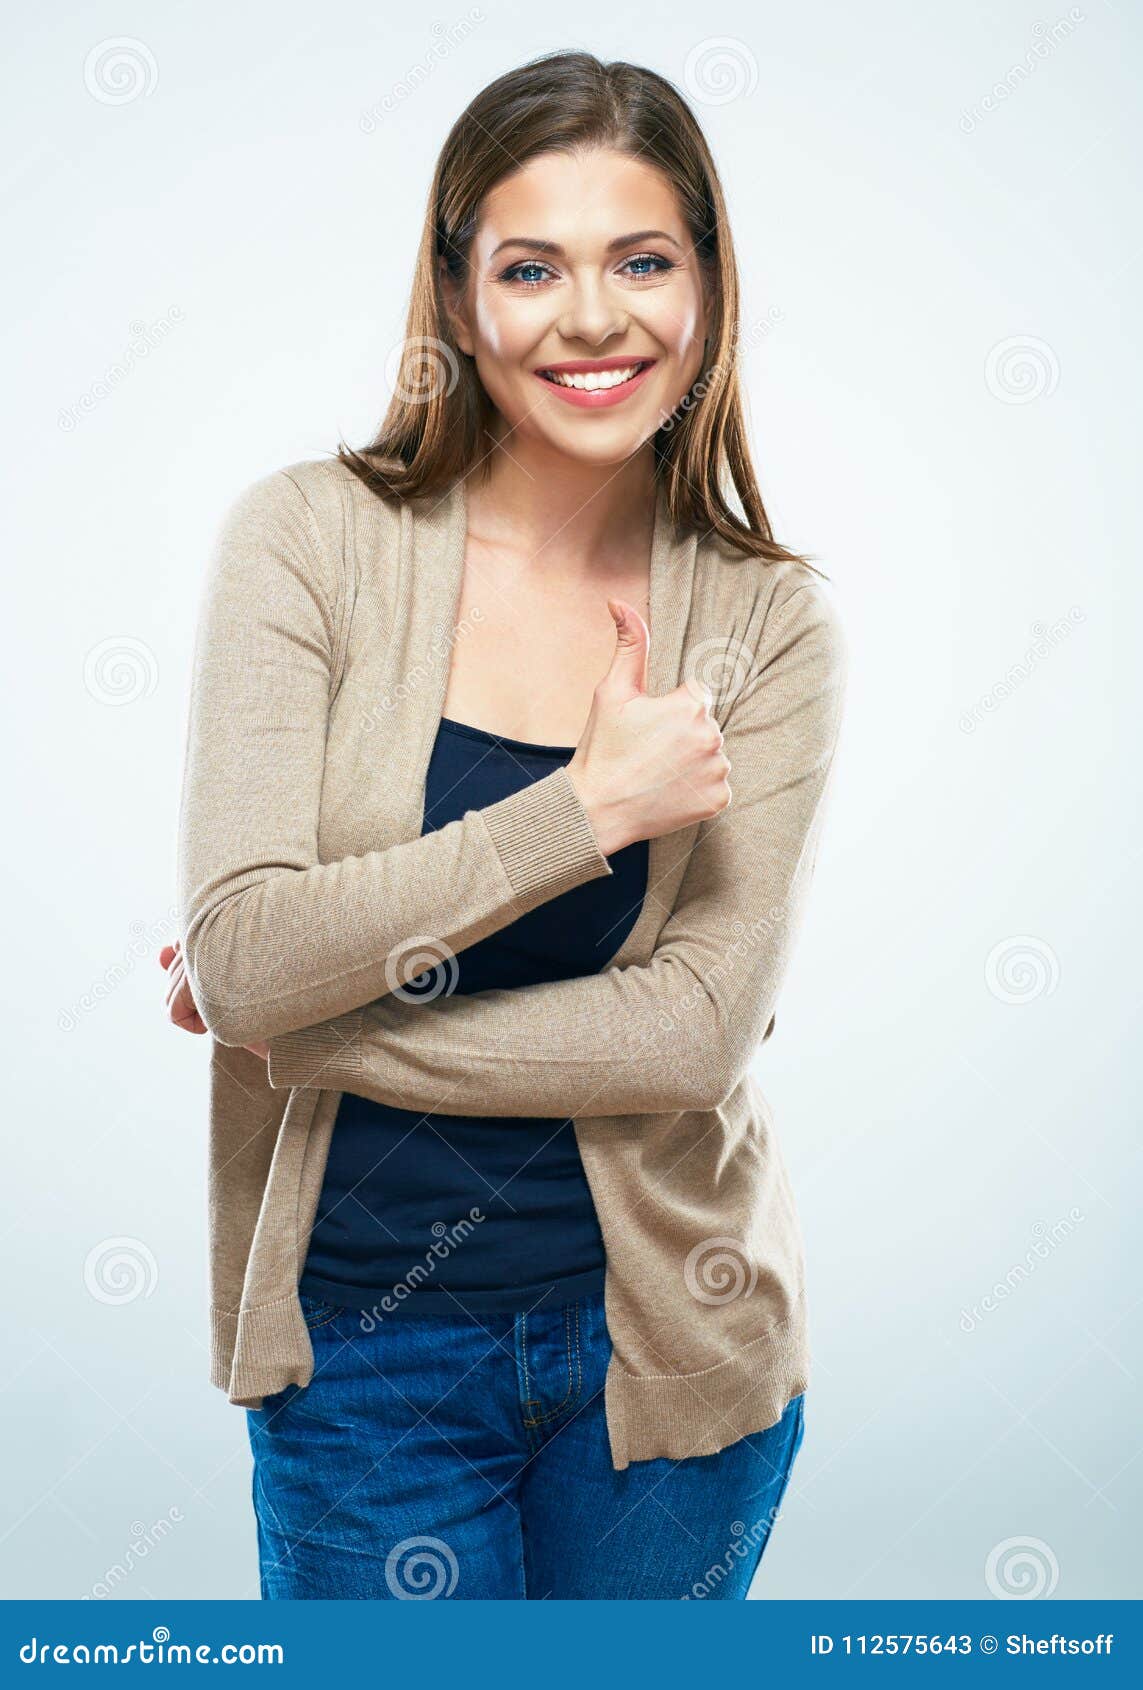 Beautiful Woman Show Thumb Up. Isolated Portrait Stock Image - Image of ...